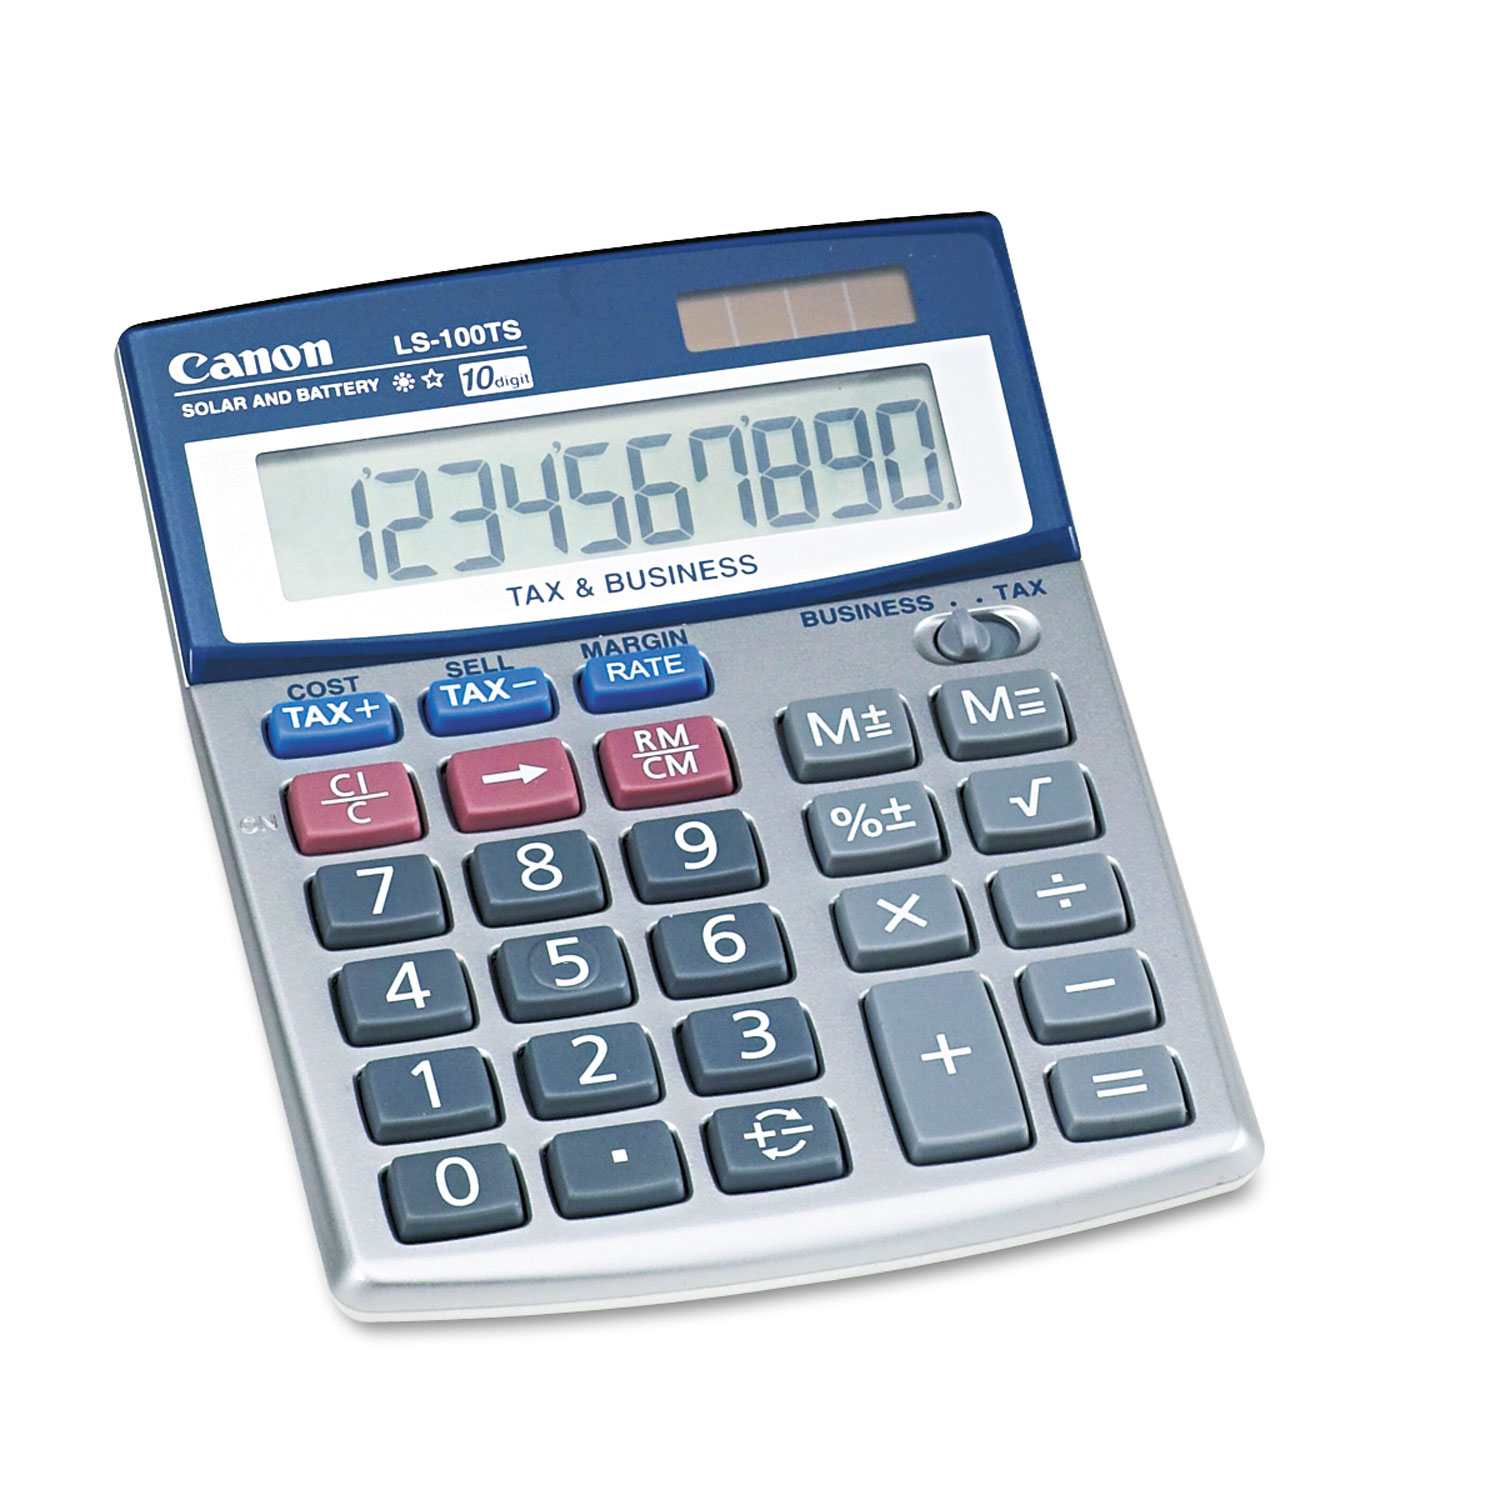  Canon 5936A028 LS-100TS Portable Business Calculator, 10-Digit LCD (CNM5936A028AA) 